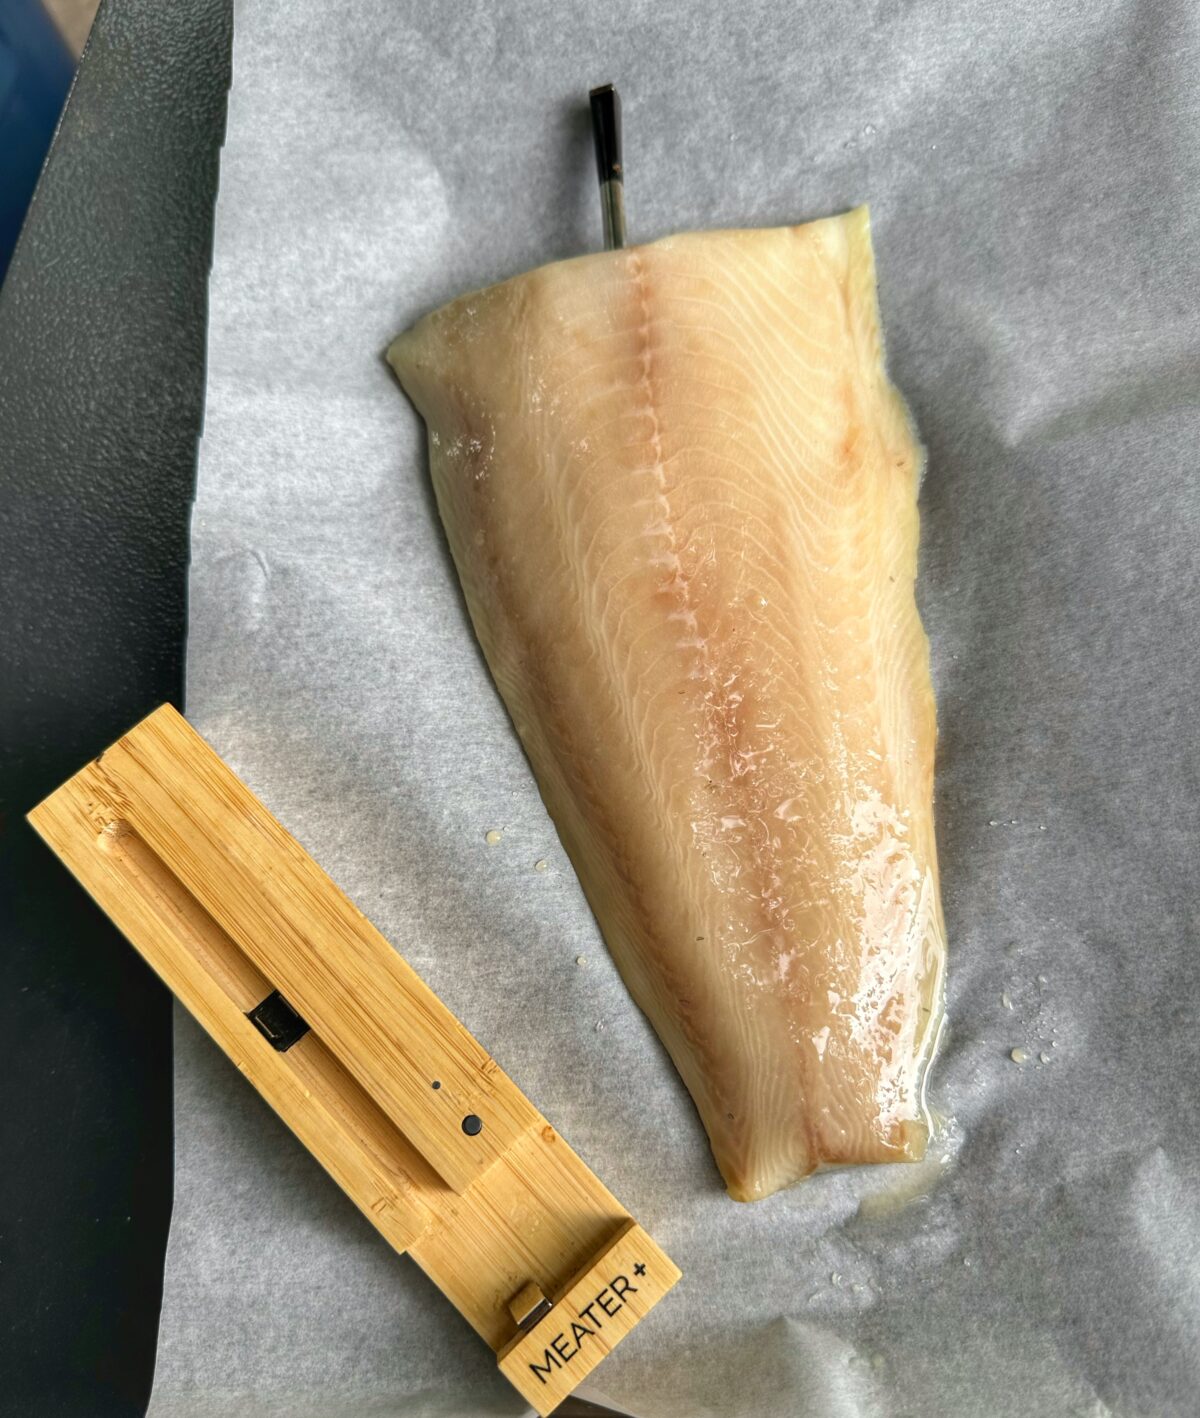 Filet of black cod with a Meater Thermometer.